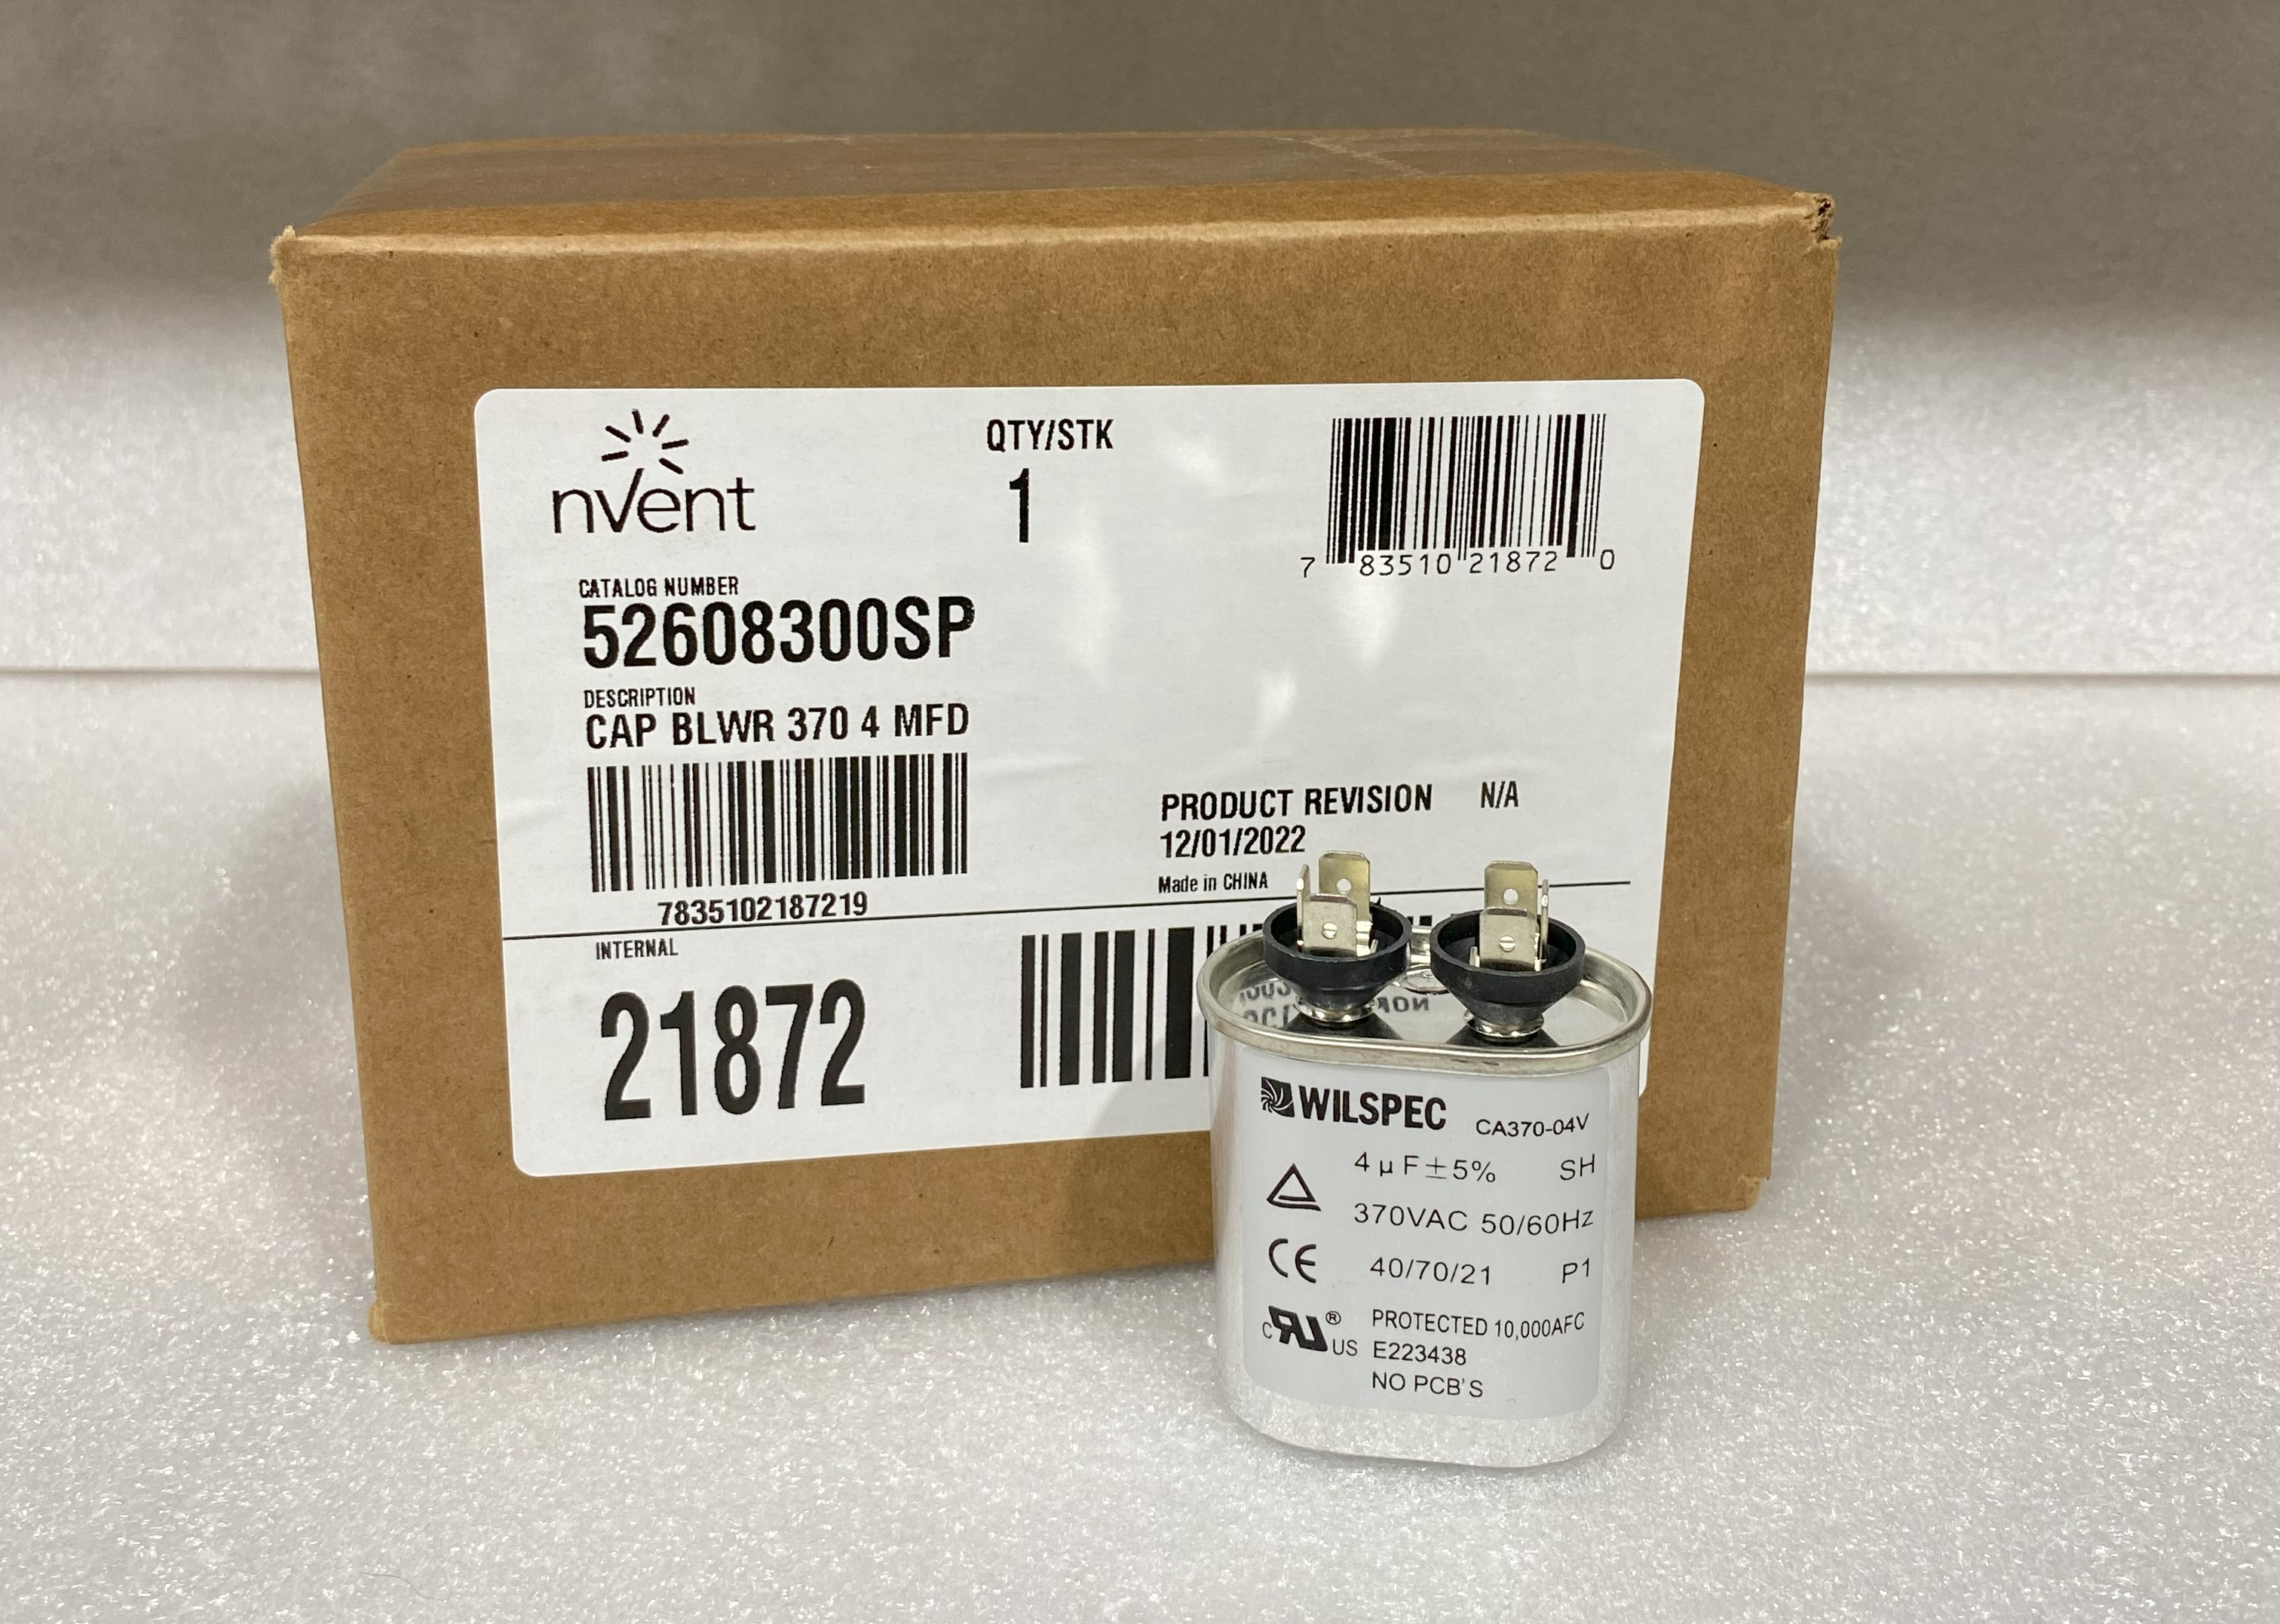 nVent 52608300SP Blower Capacitor